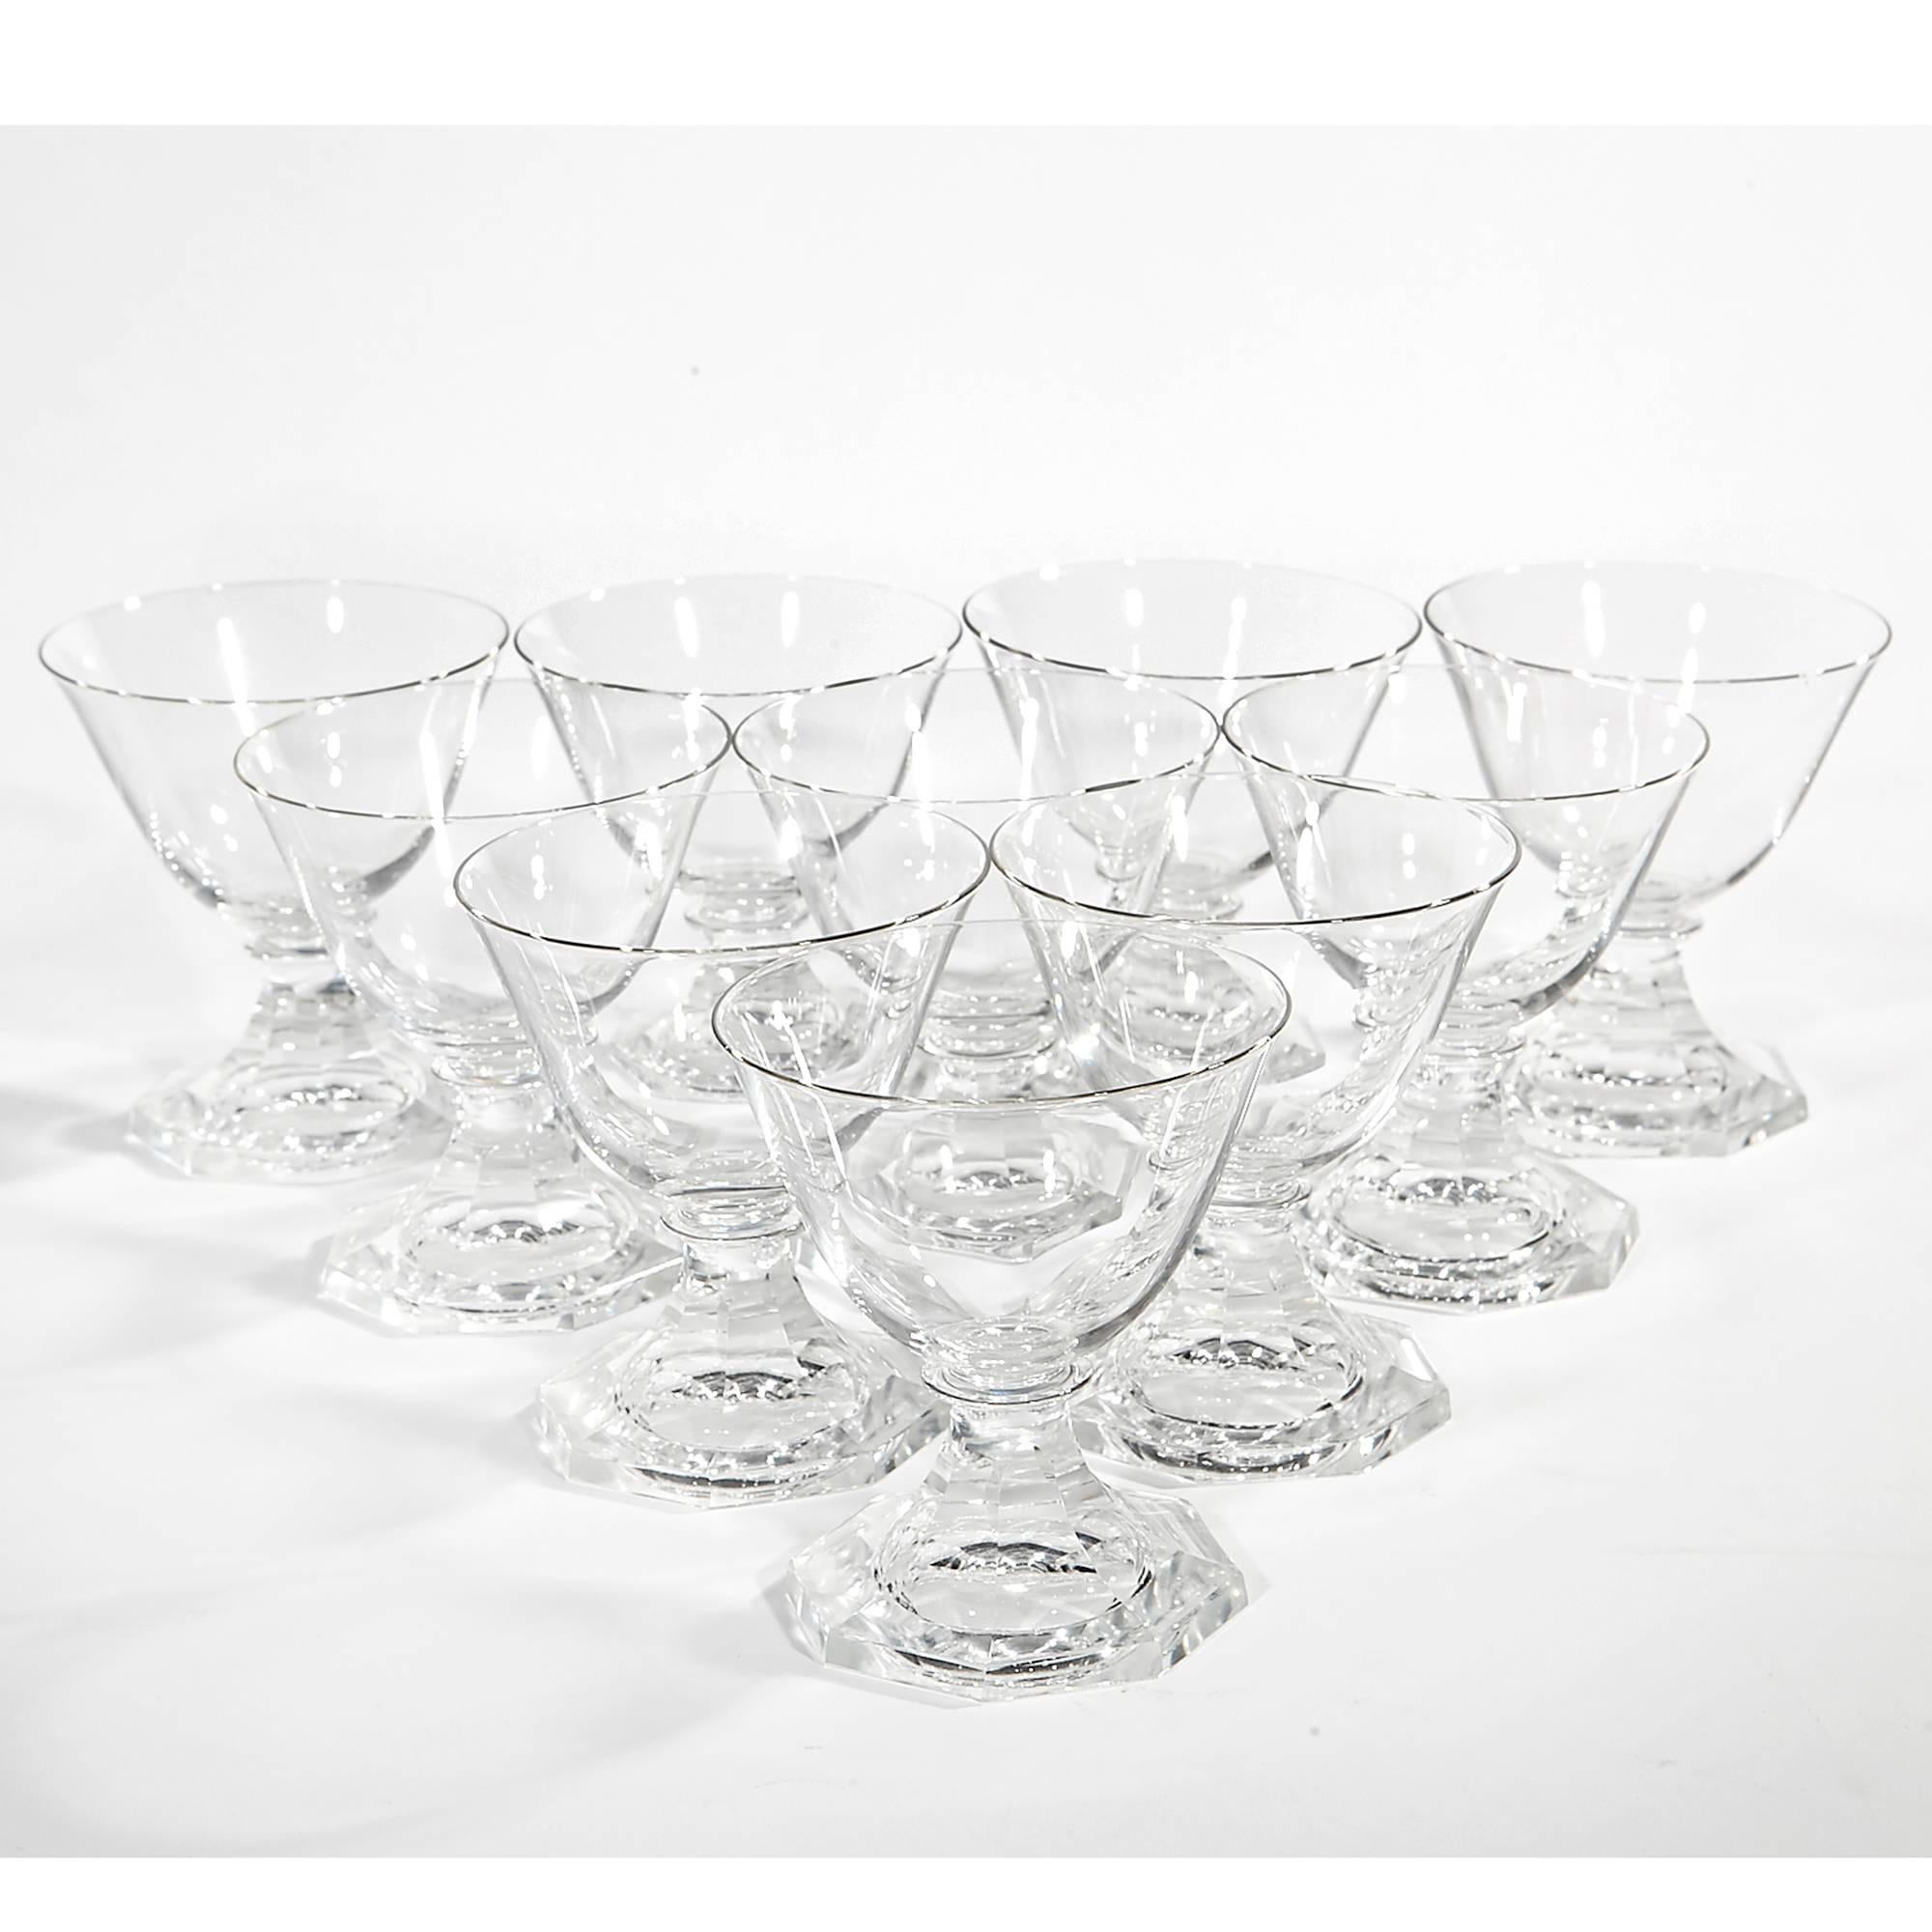 Orrefors Crystal Stems in the Seaford Pattern, 45 Pieces For Sale 1